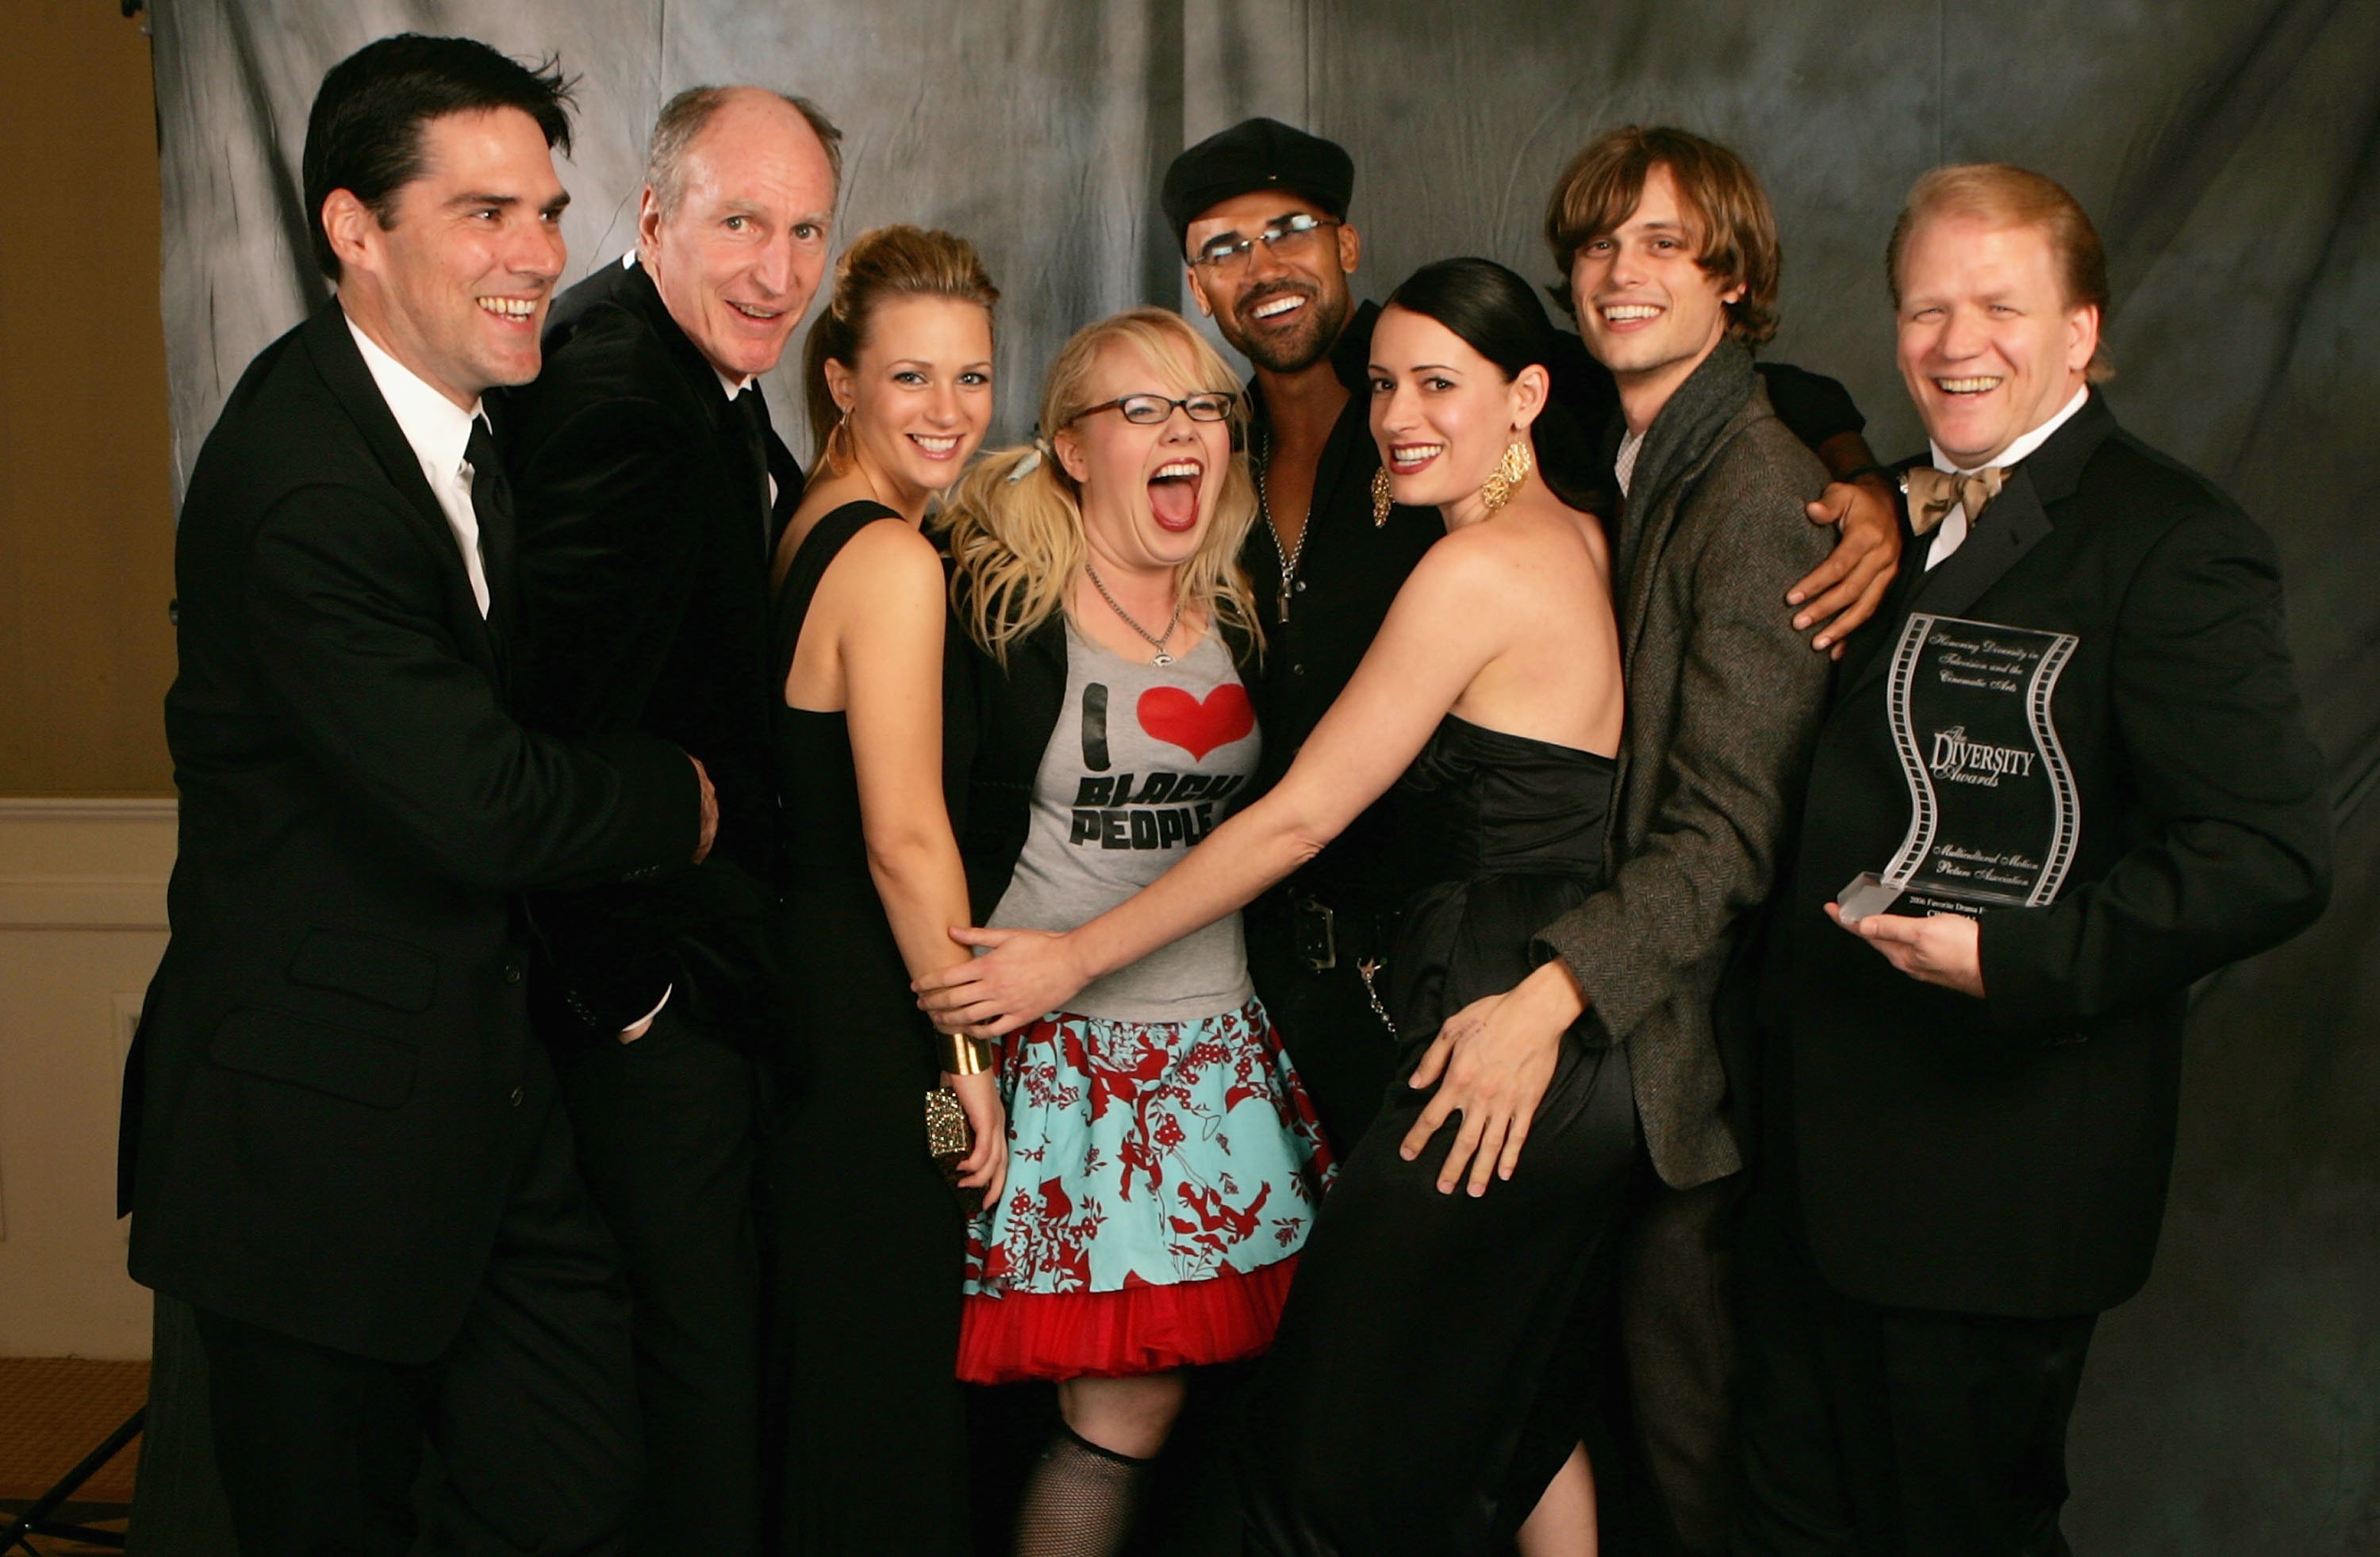 "Criminal Minds" casts and Executive Producer, Ed Bernero, pose in the portrait studio during the 14th Annual Diversity Awards Gala held at the Century Plaza Hotel on November 19, 2006, in Los Angeles, California. | Source: Getty Images